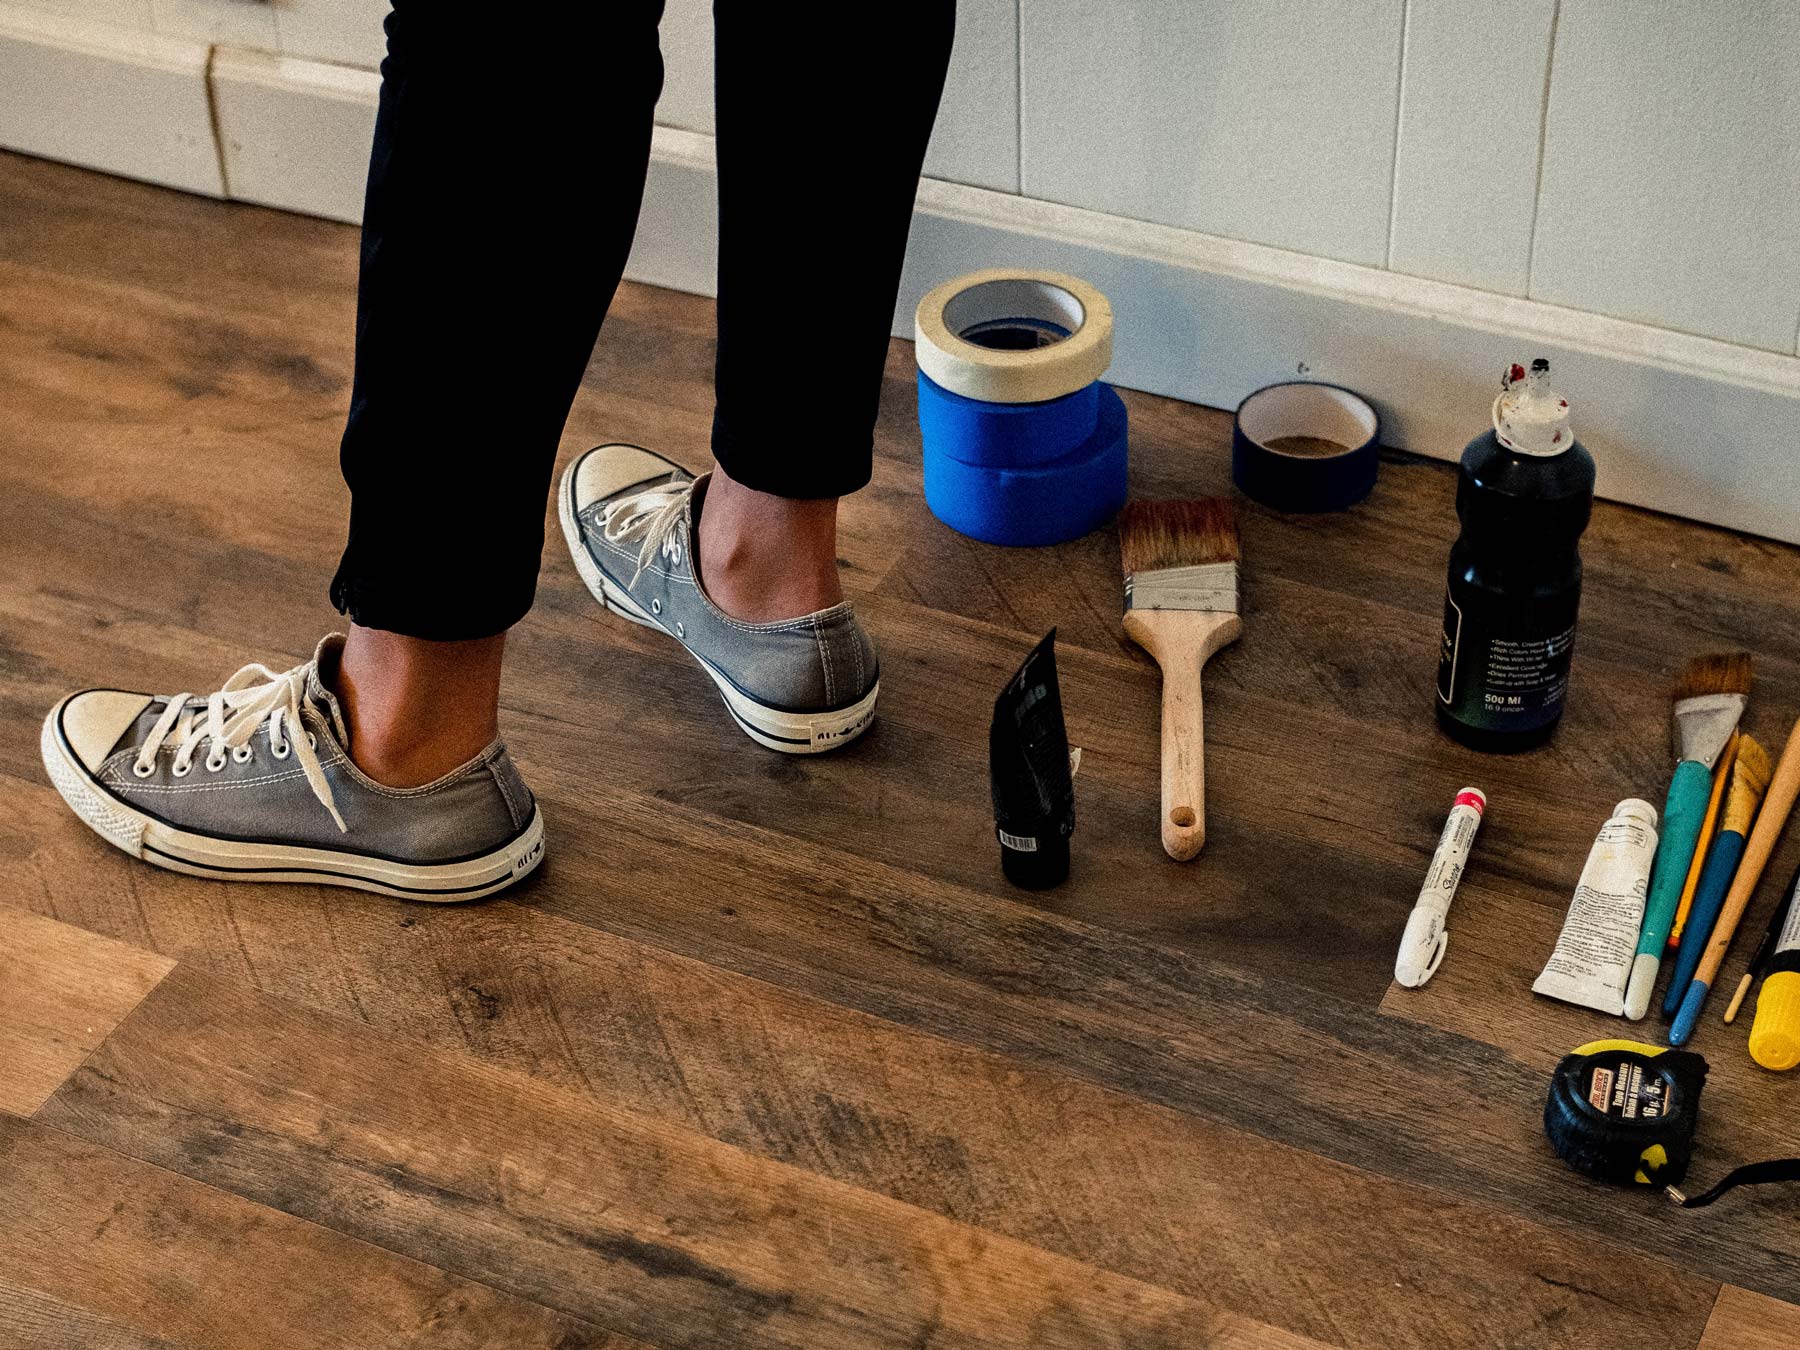 Painting and repair tools near a person's feet on a wooden floor